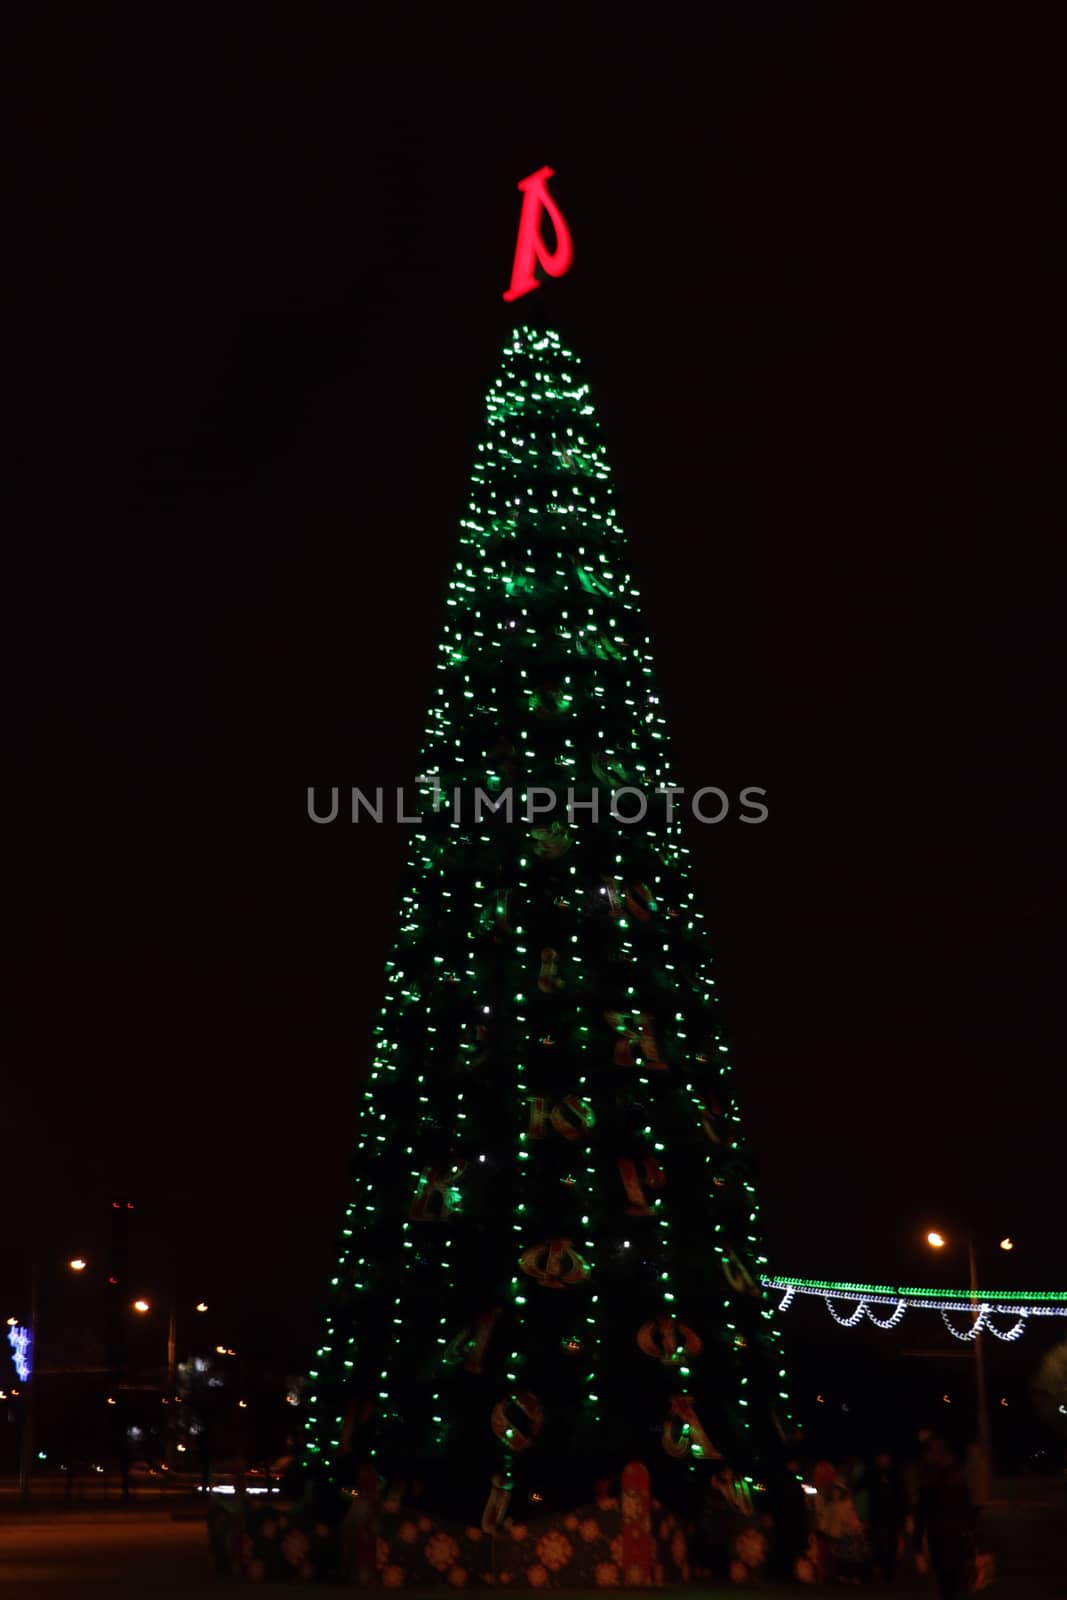 Christmas tree with lights on, in front of a city landscape at night. by kip02kas